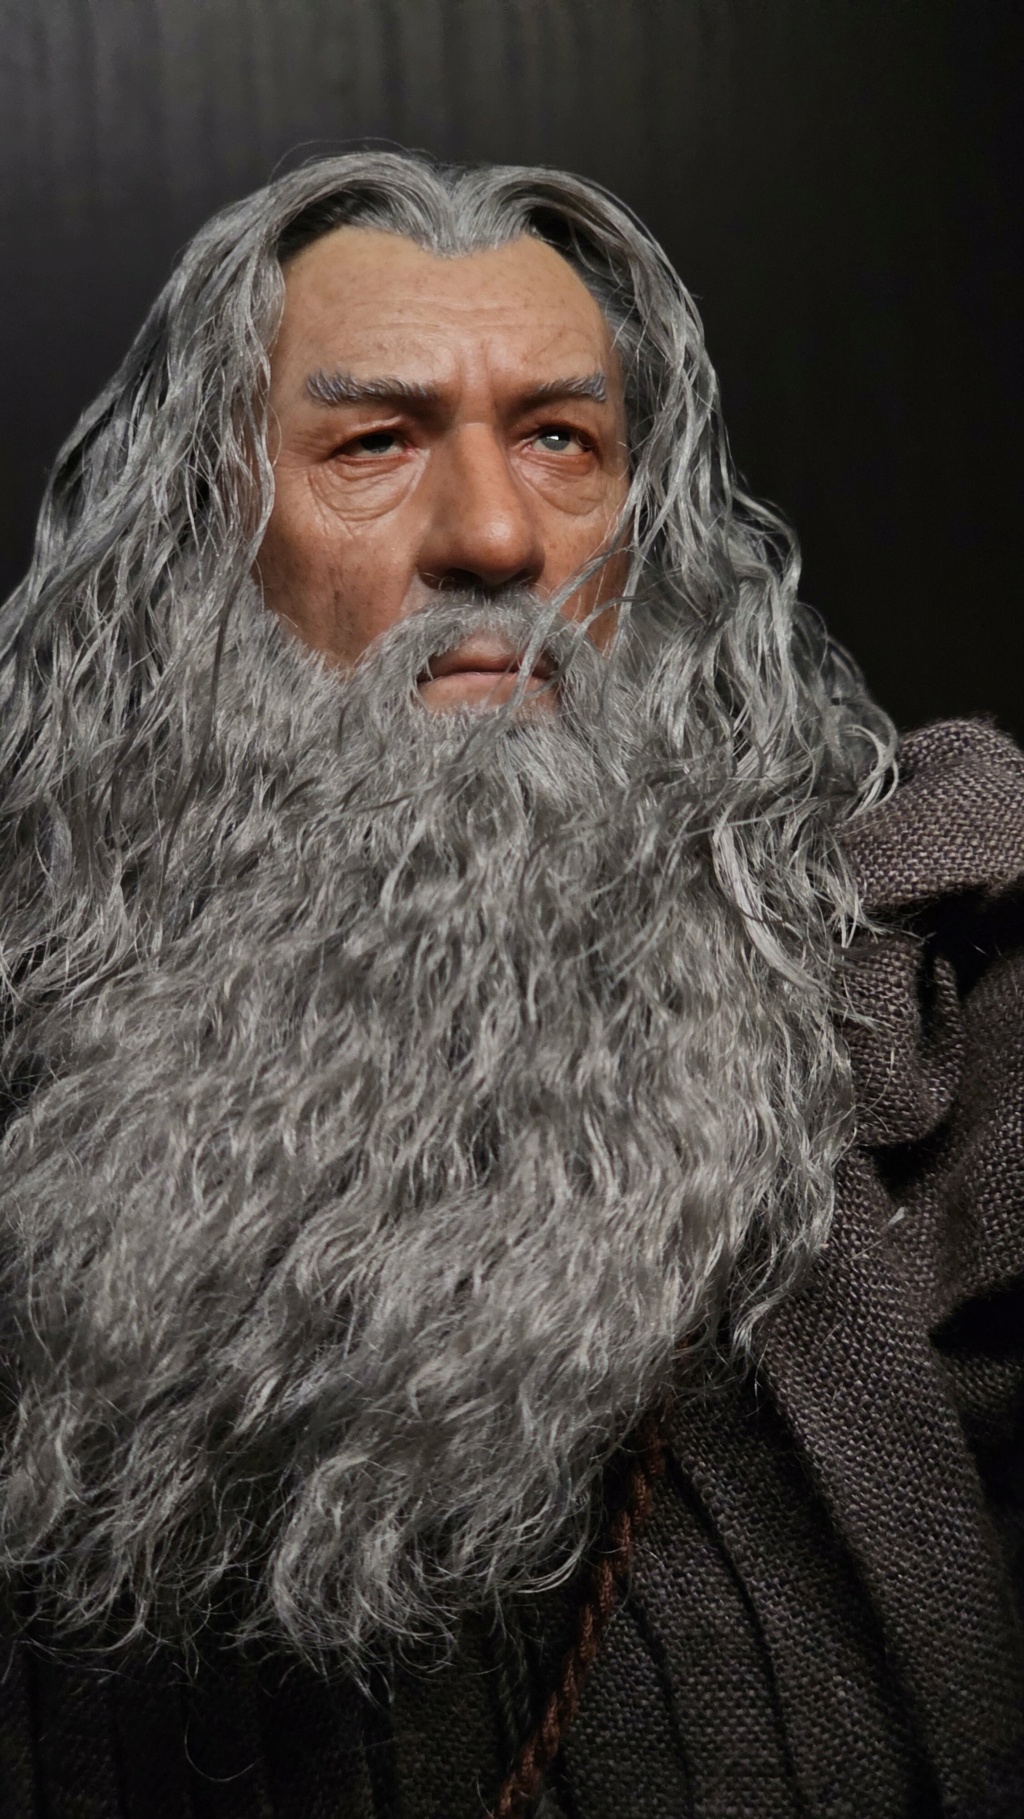 InArt - NEW PRODUCT: Queen Studios & INART: 1/6 The Lord of the Rings Gandalf (Grey Robe) Action Figure - Page 4 47740710